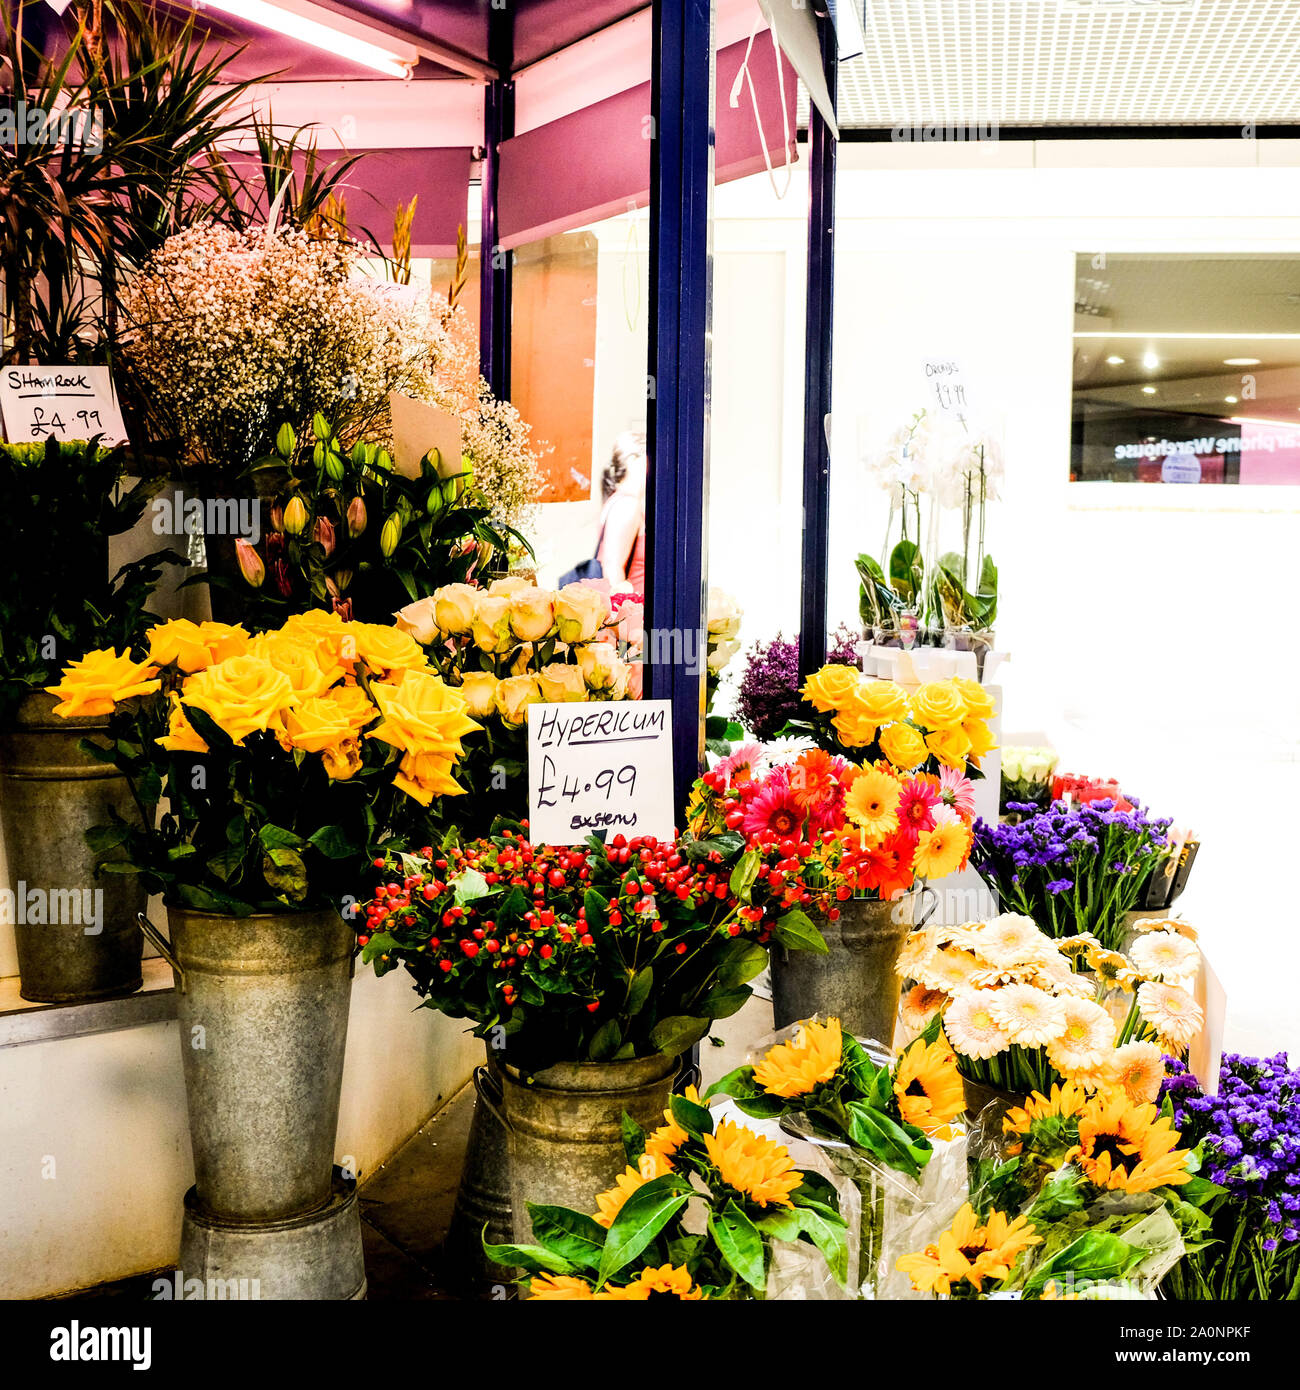 Indoor Flower Seller or Florist in a Shopping Mall With Sunflowers, Roses, Hypericums and Plants Stock Photo